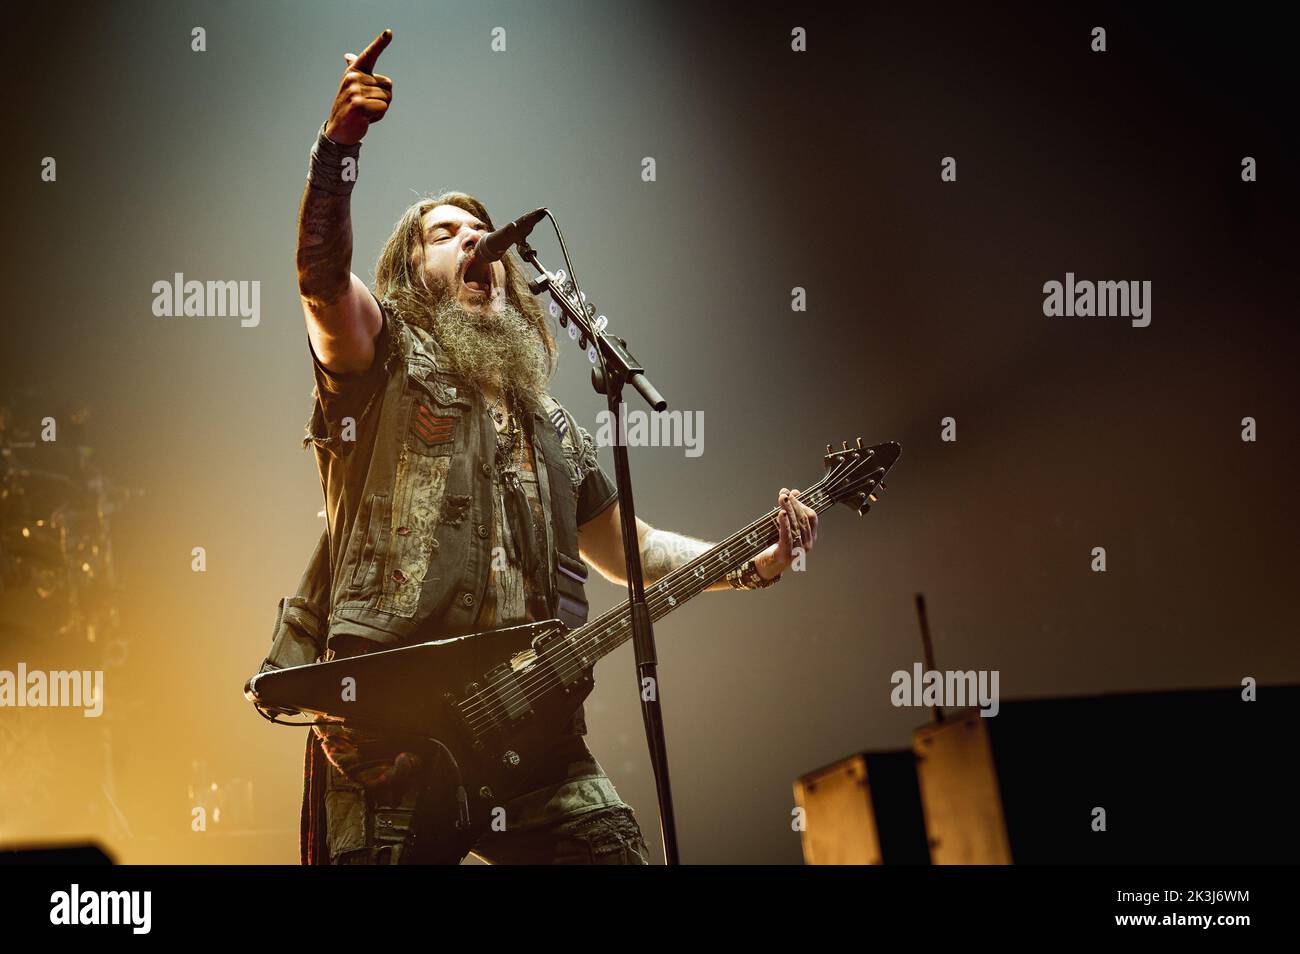 Copenhagen, Denmark. 26th Sep, 2022. The American heavy metal band Machine Head performs a live concert at Forum Black Box in Frederiksberg, Copenhagen. Here vocalist and guitarist Robb Flynn is seen live on stage. (Photo Credit: Gonzales Photo/Alamy Live News Stock Photo